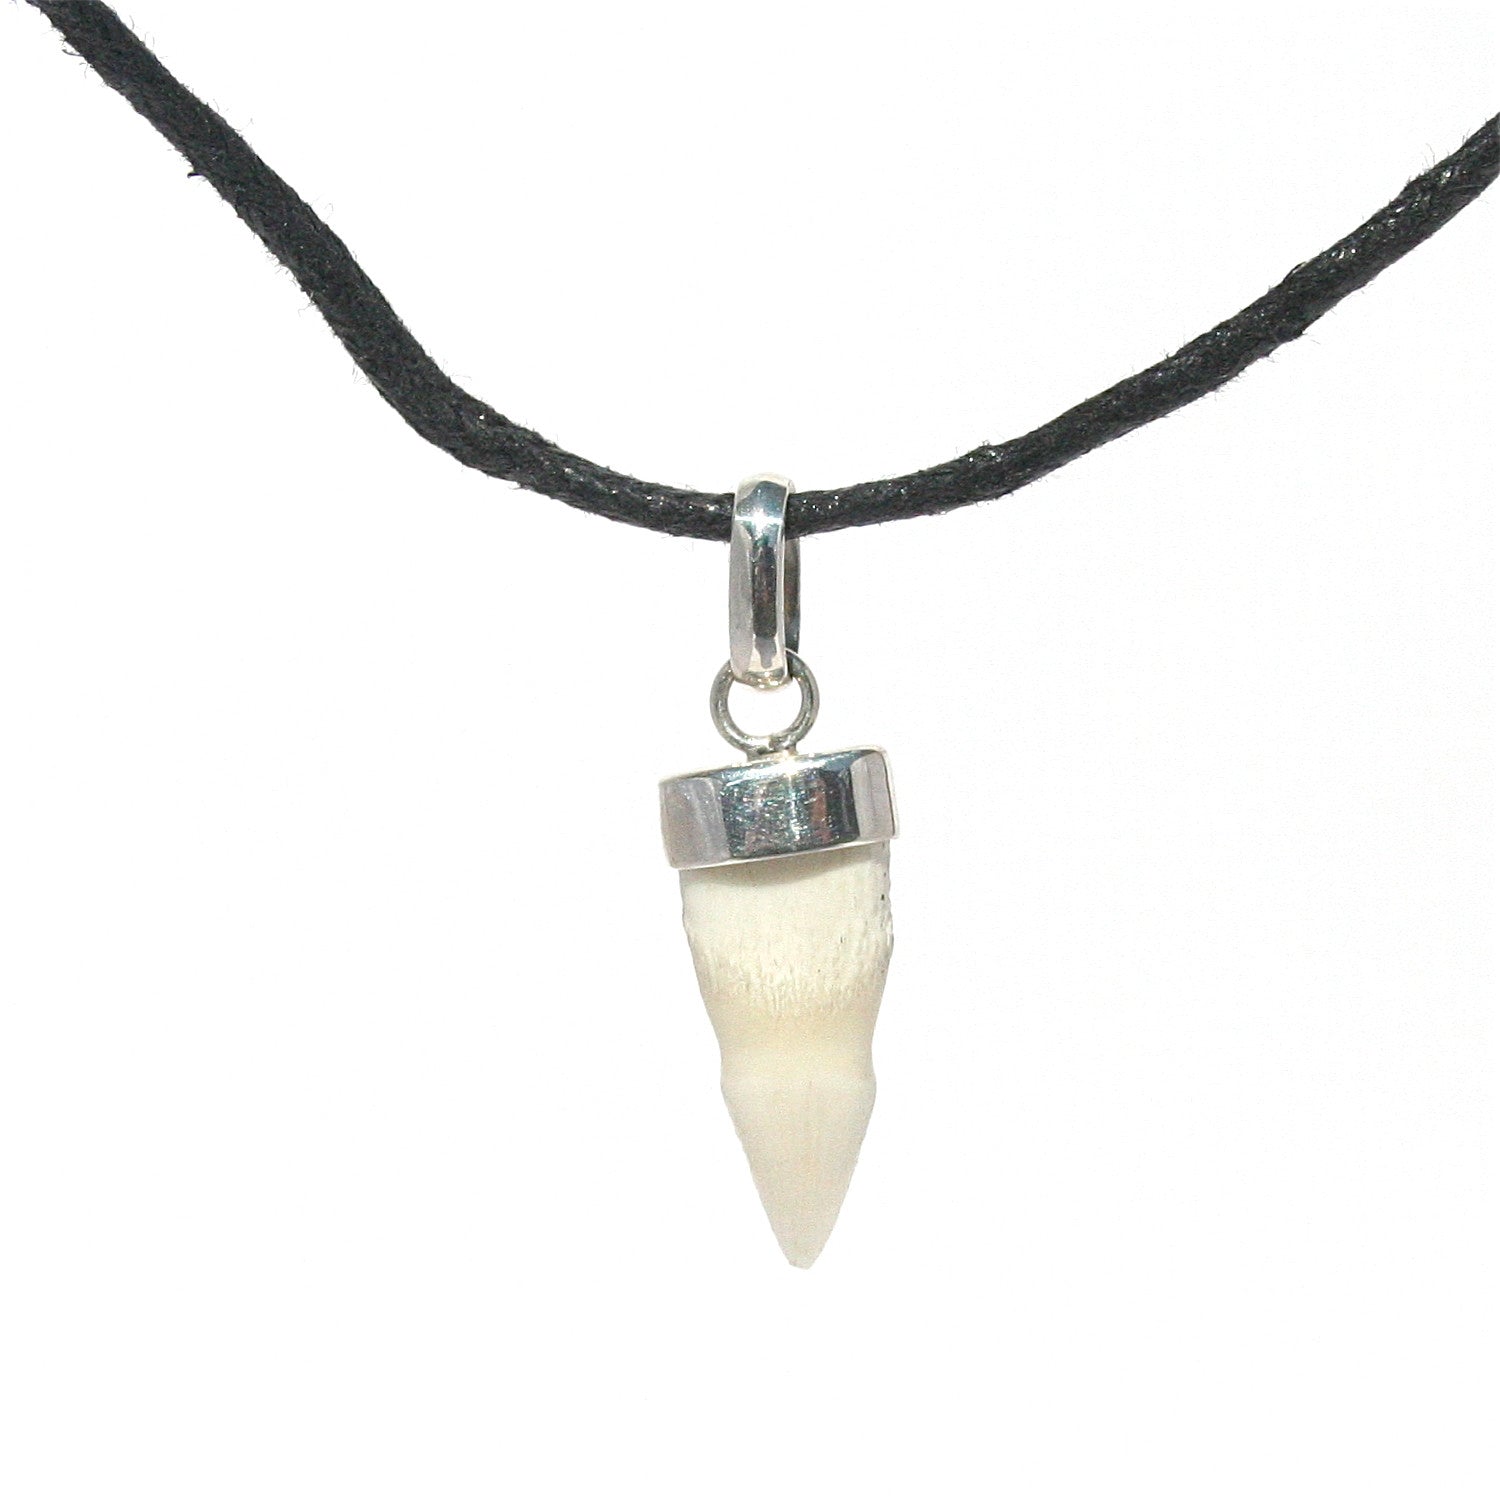 CROCODILE TOOTH PENDANT SET IN STERLING SILVER WITH BLACK COTTON NECKLACE: ADJUSTABLE IN LENGTH